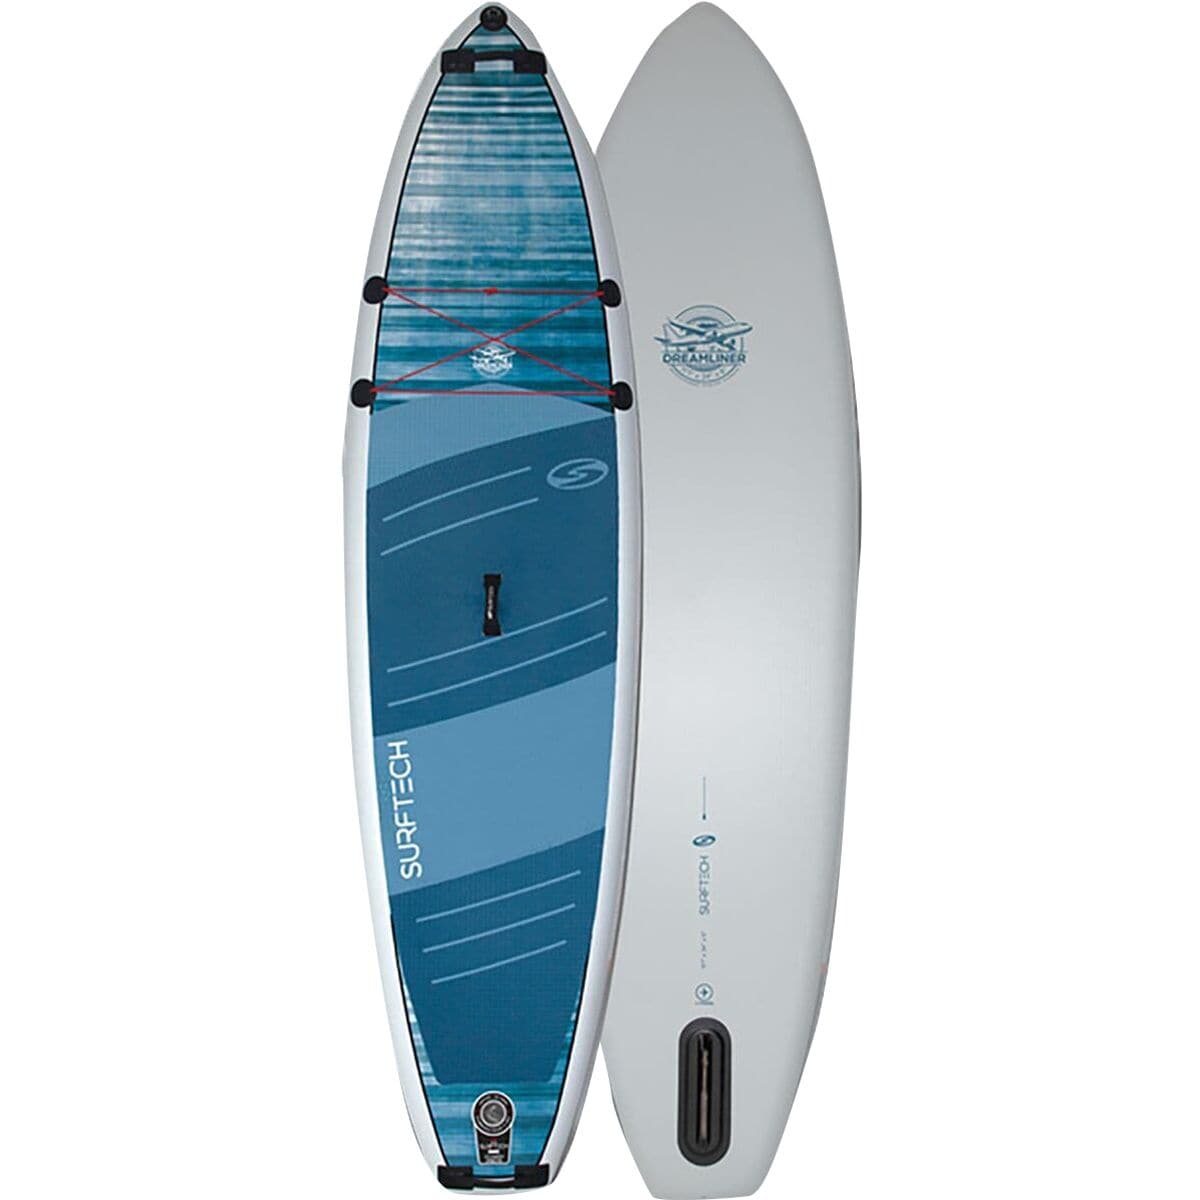 Surftech Air Travel Dreamliner Inflatable Stand-Up Paddleboard